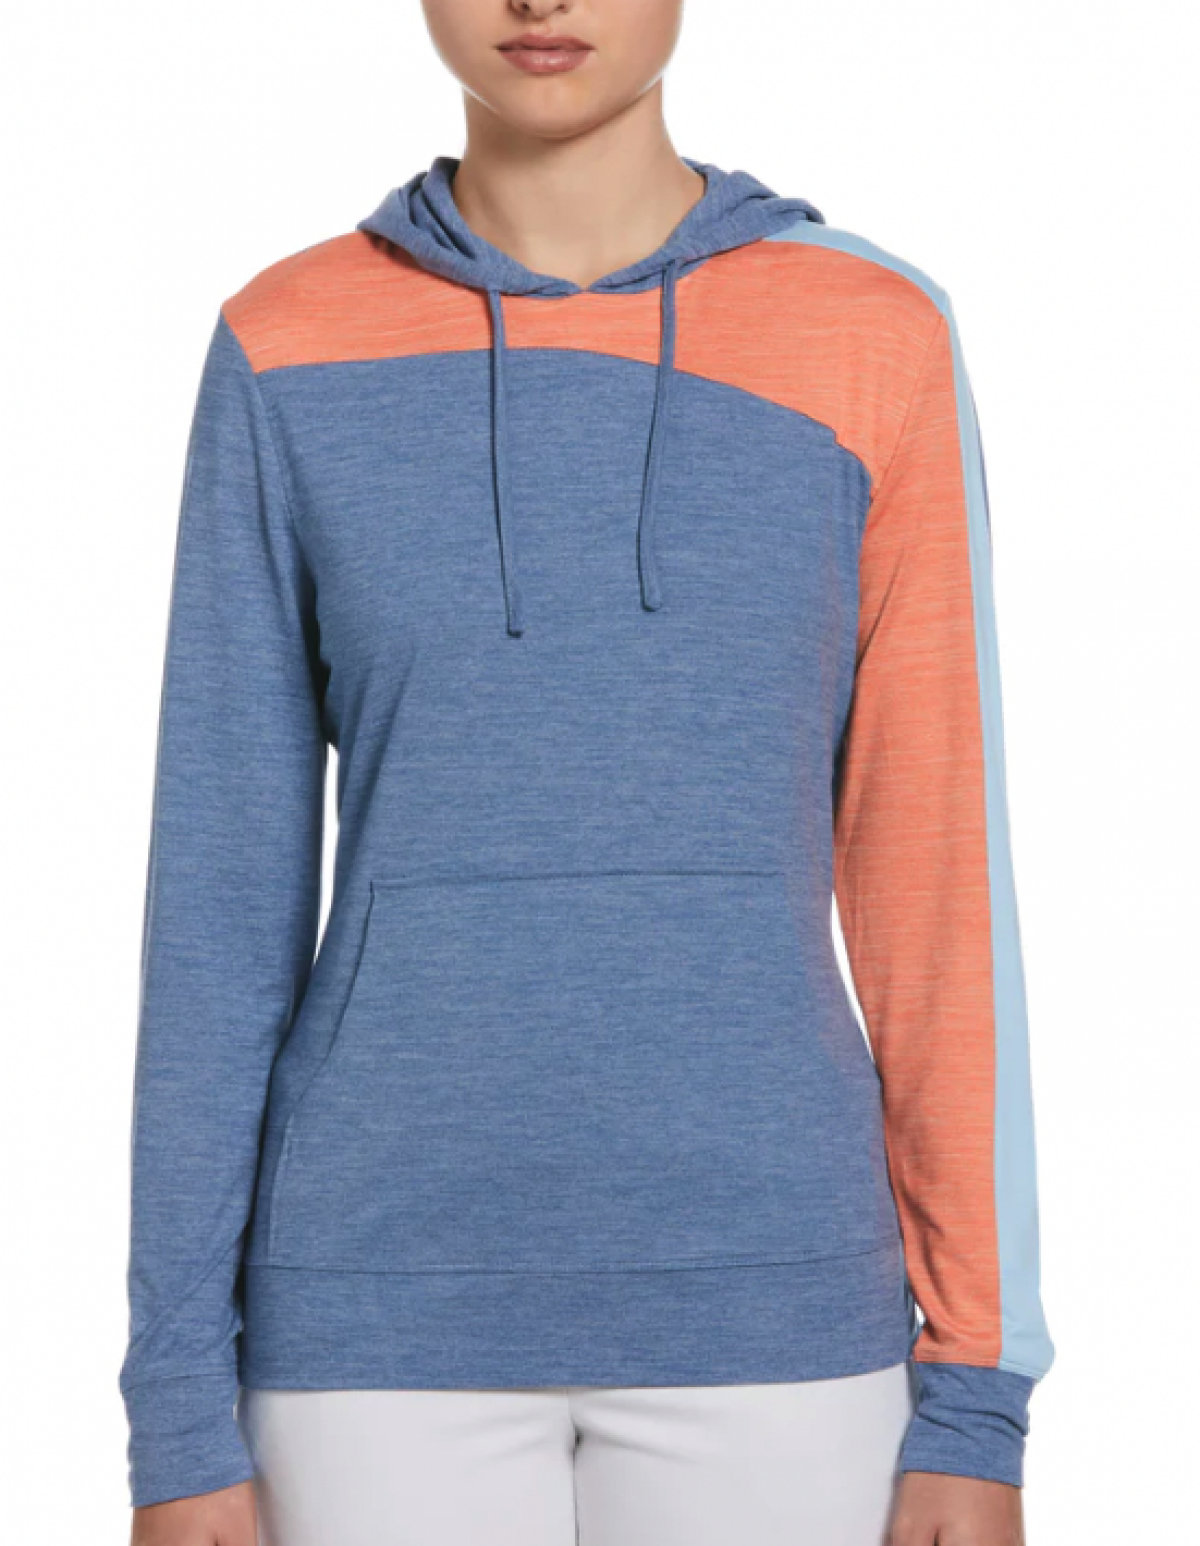 Women's Asymmetrical Colour Blocked Golf Hoodie with Pockets